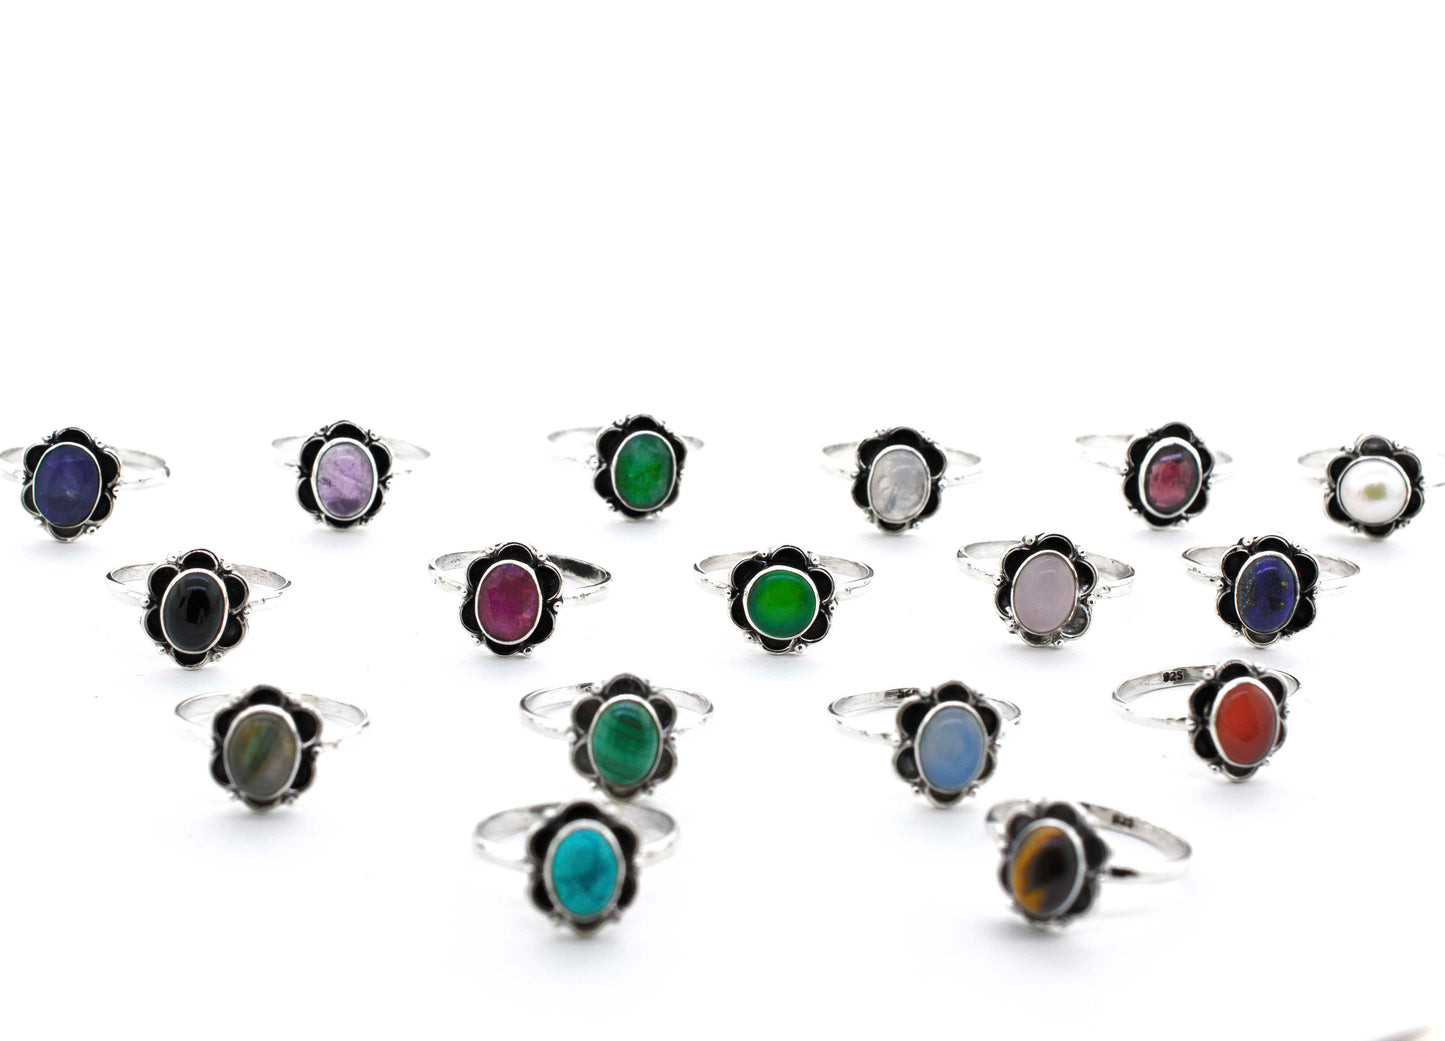 A group of Gemstone Rings With Oxidized Flower Design on a white background.